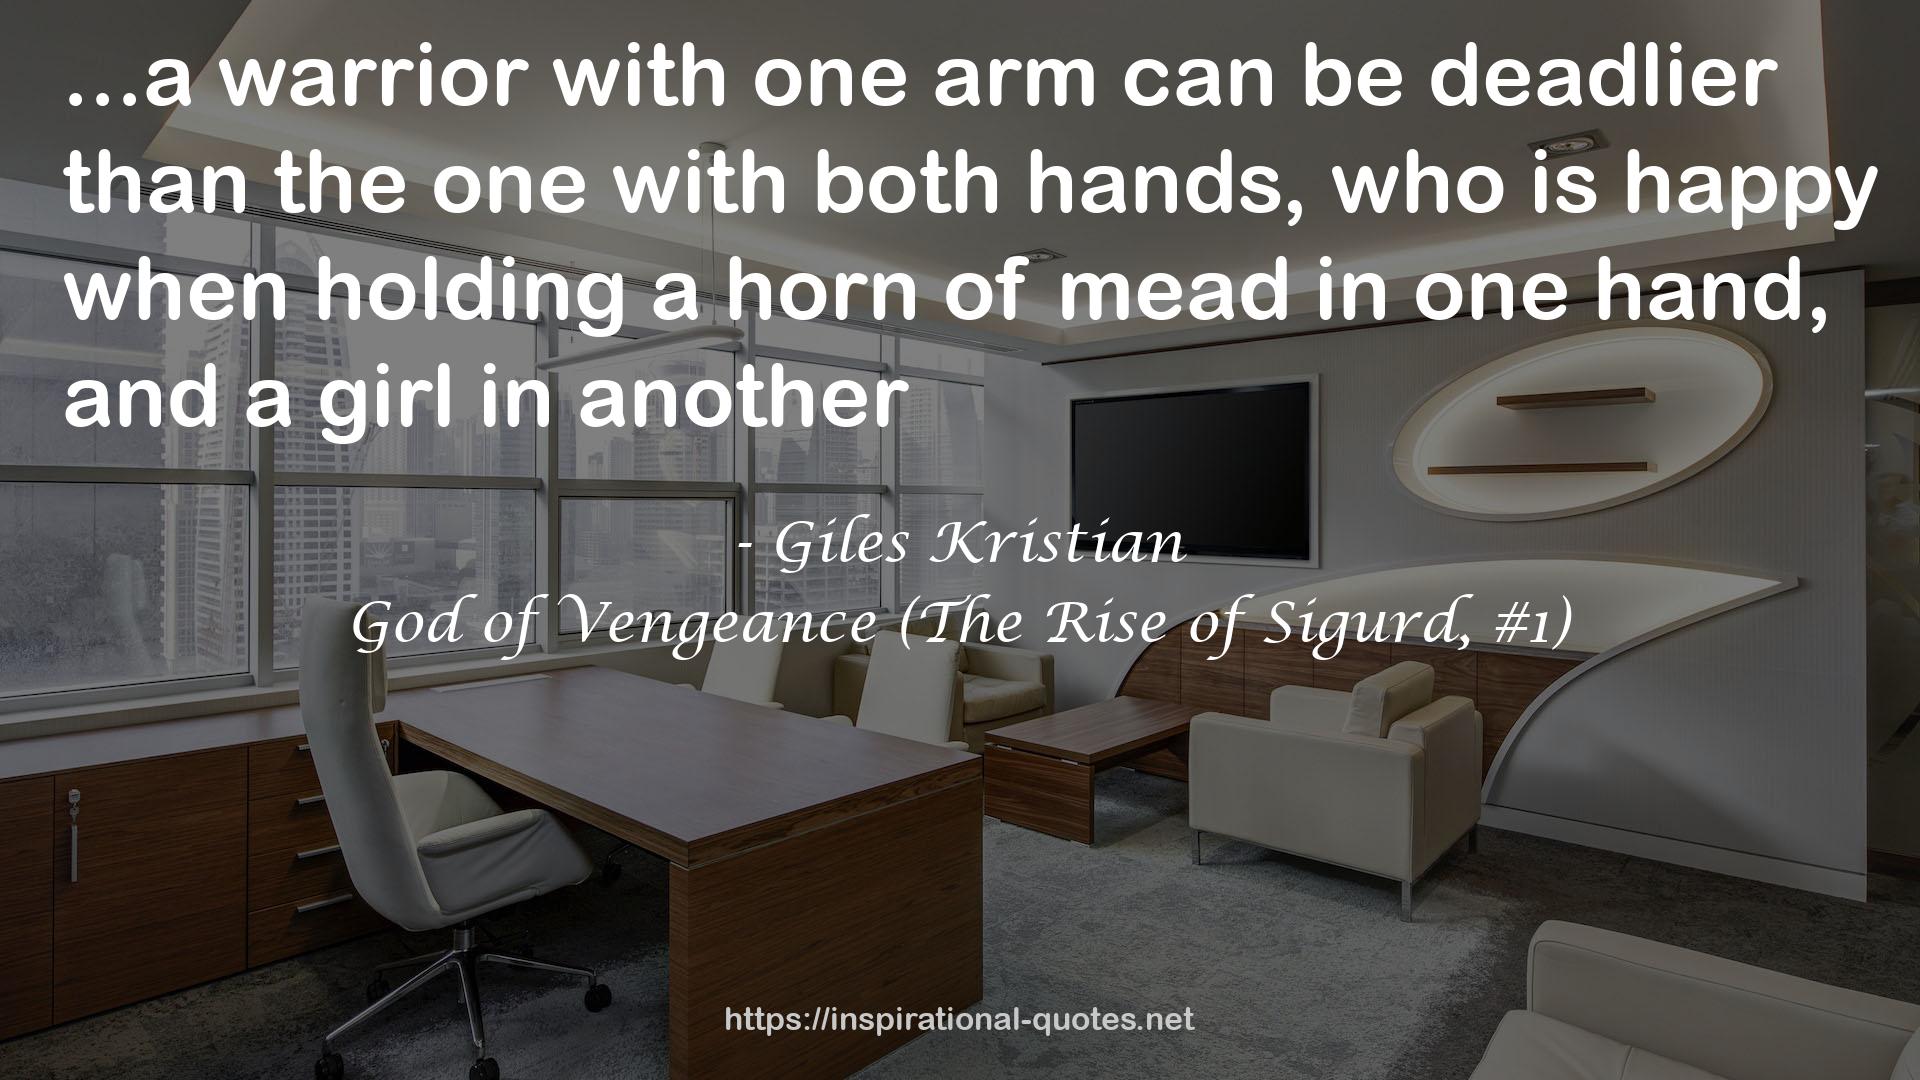 Giles Kristian QUOTES